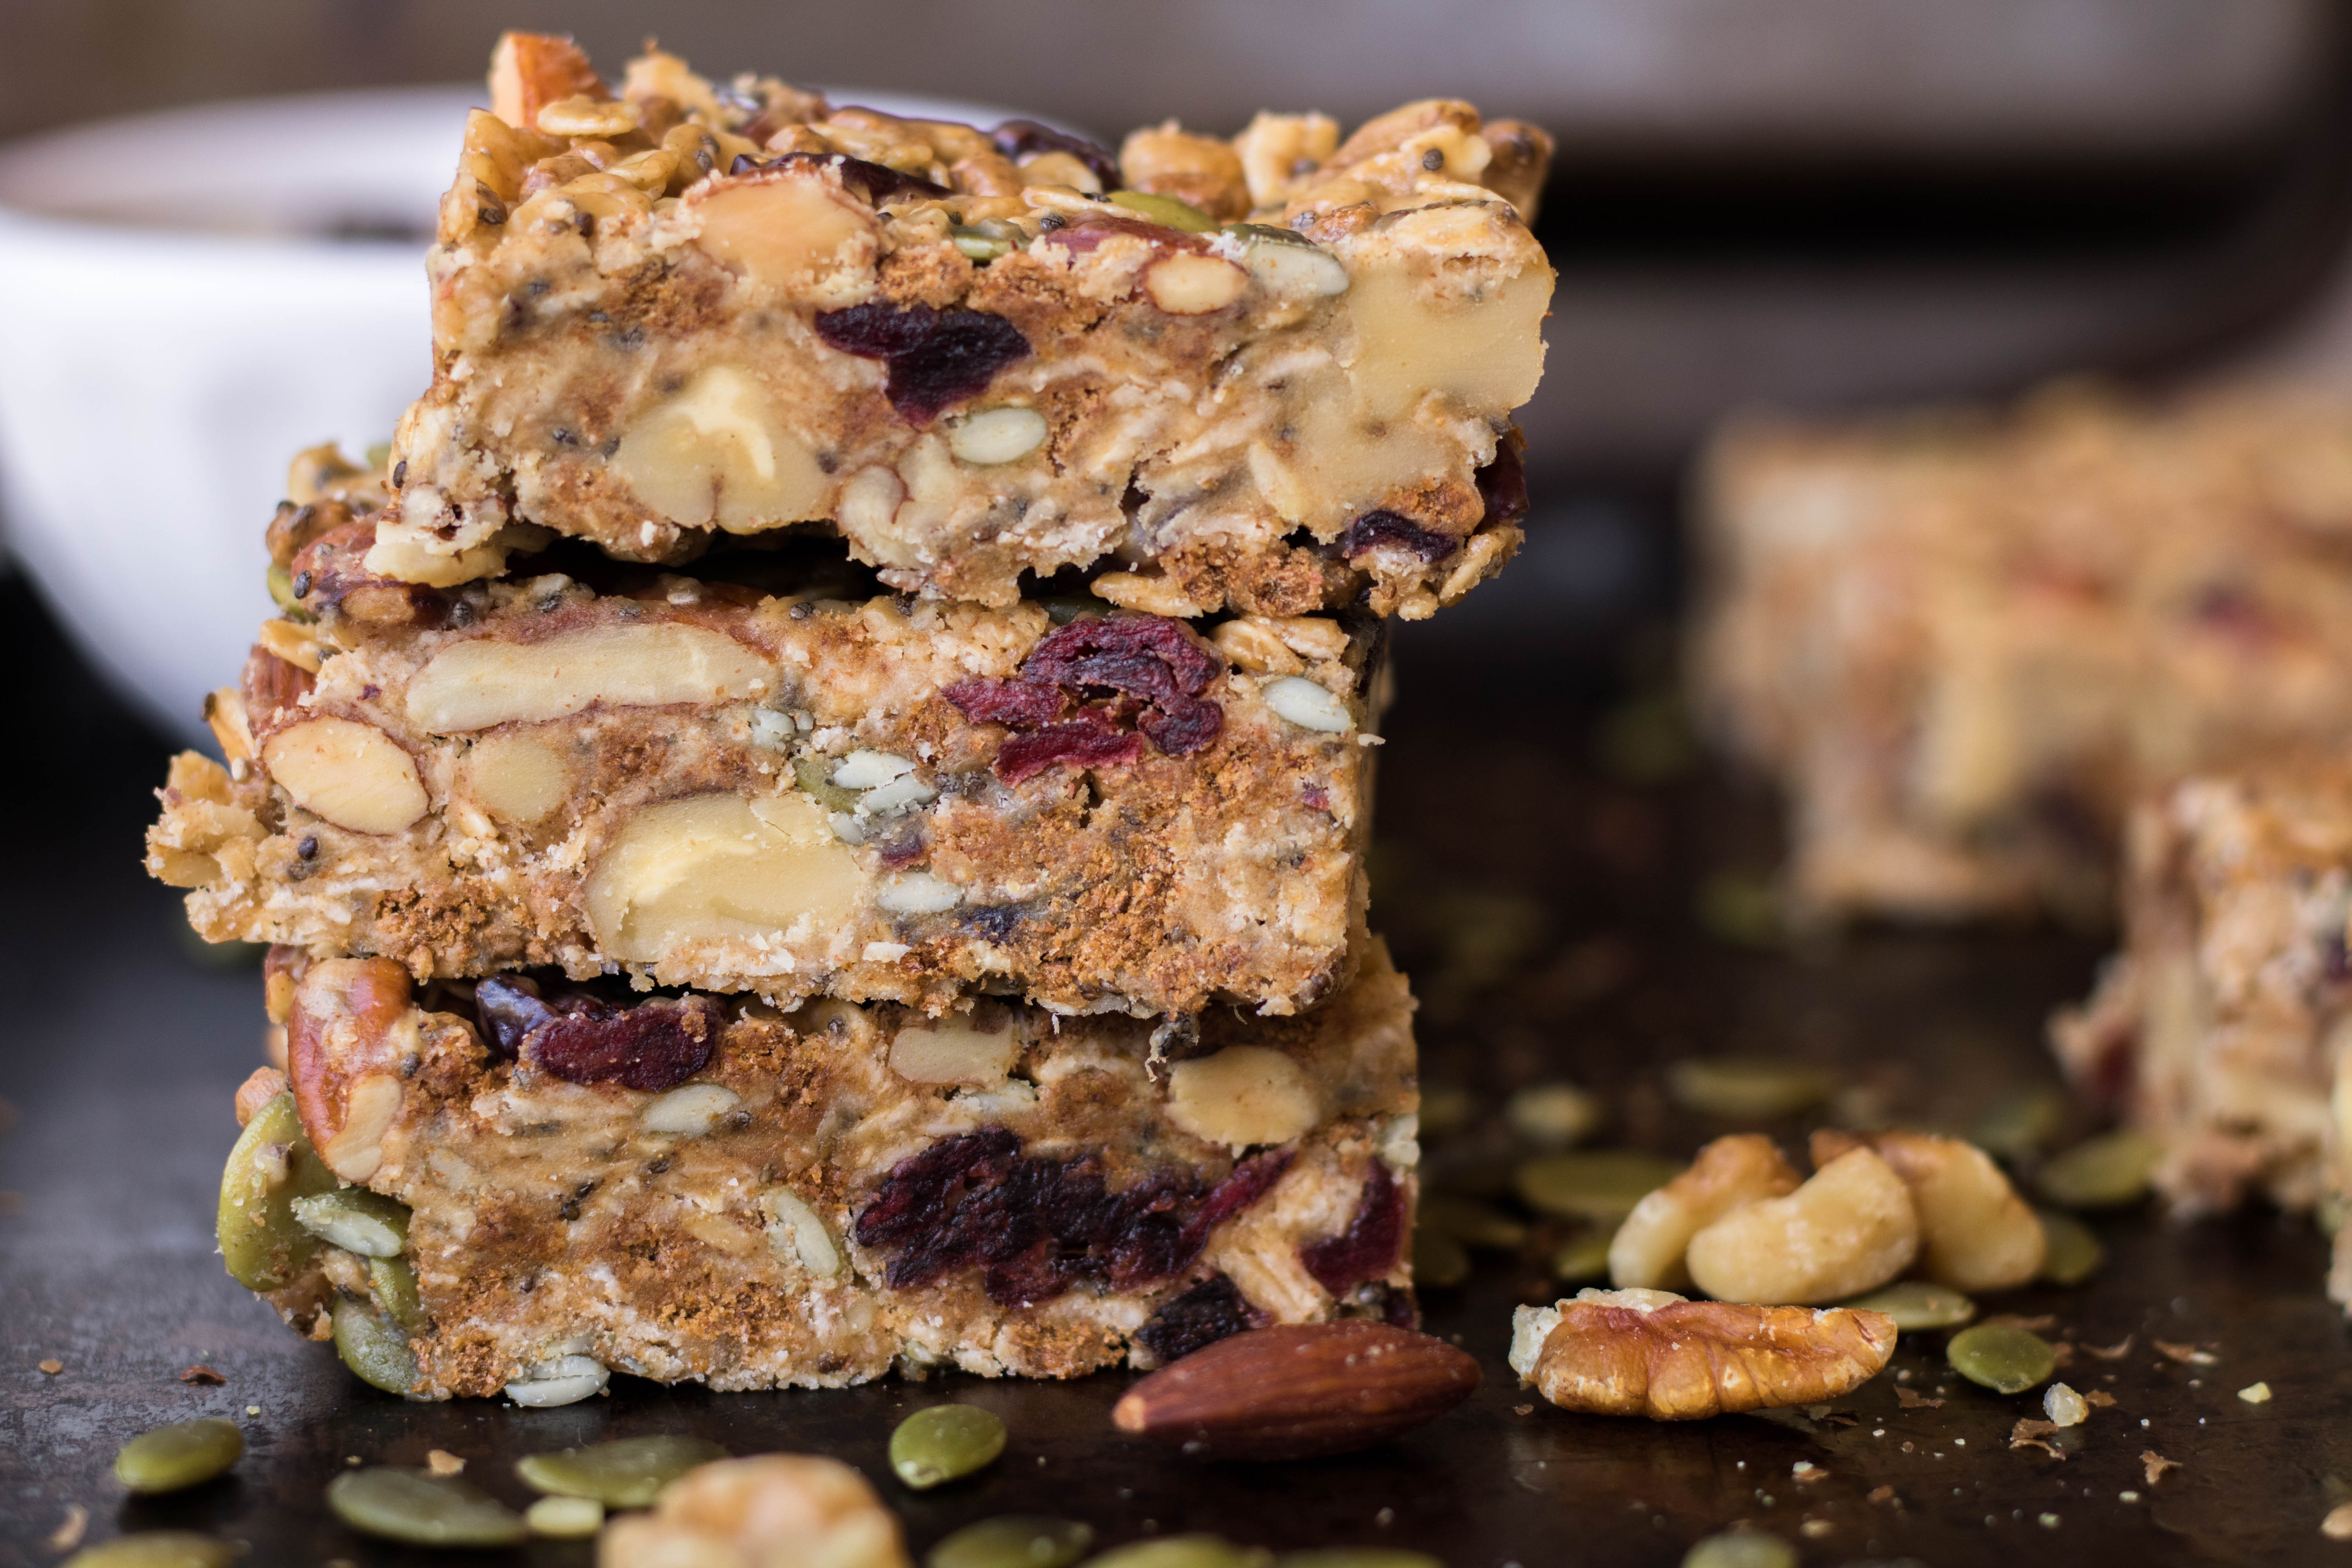 Ingredients to make Trail mix energy bars recipe